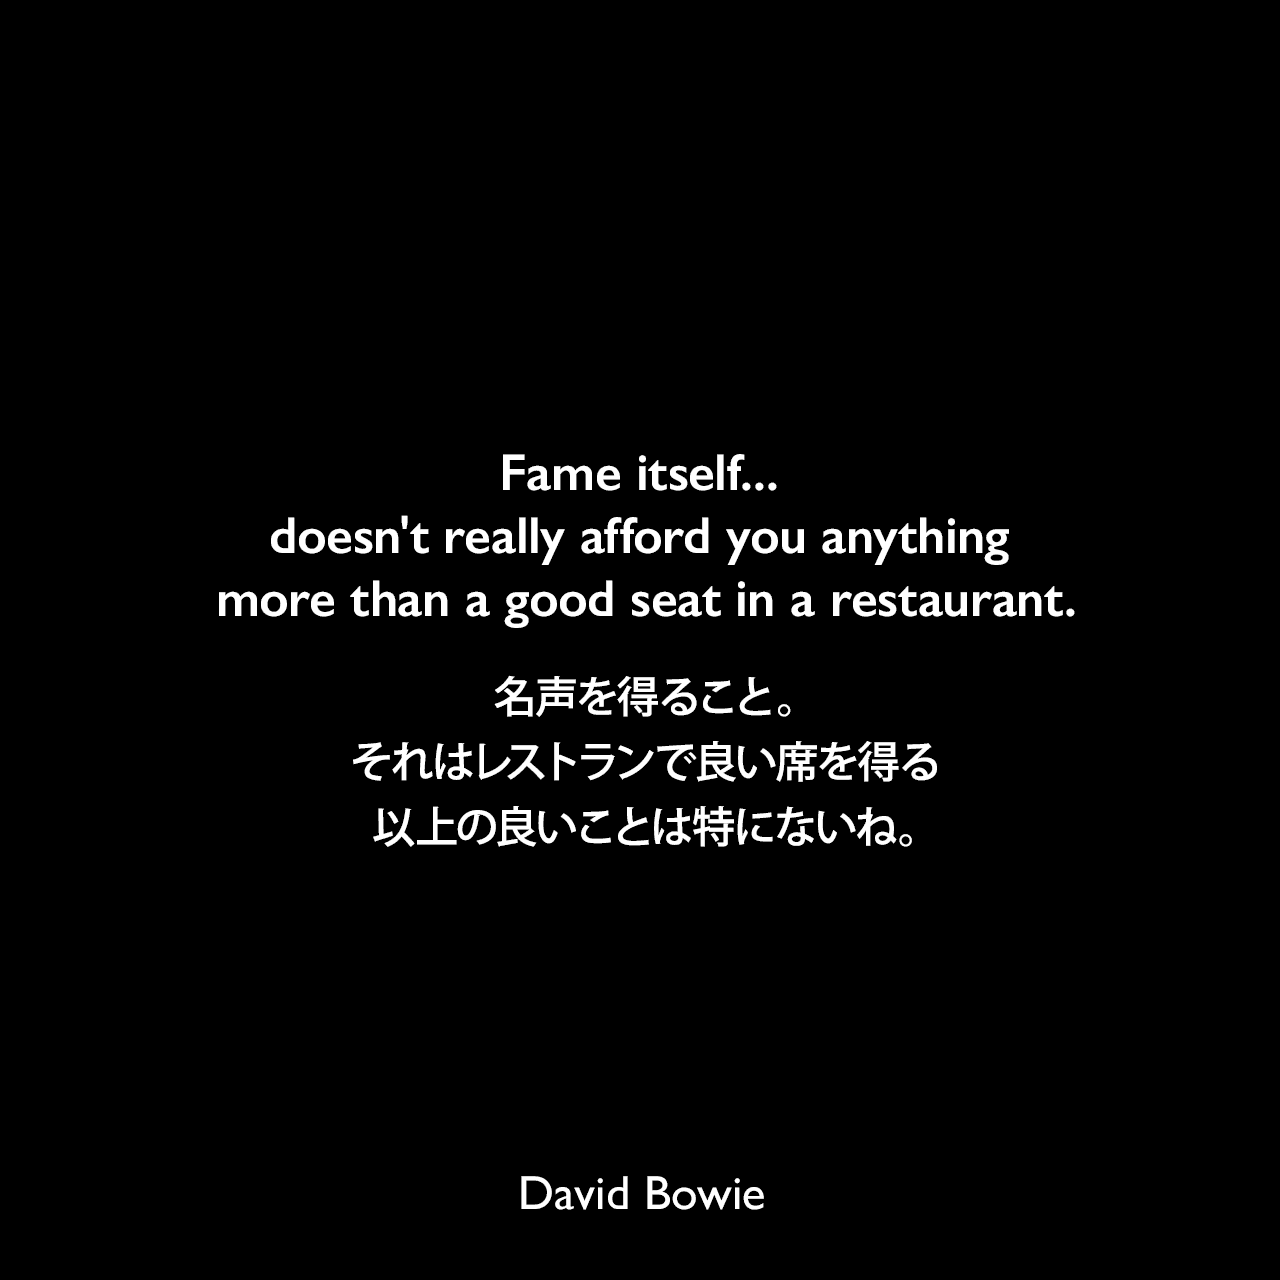 Fame itself... doesn't really afford you anything more than a good seat in a restaurant.名声を得ること。それはレストランで良い席を得る以上の良いことは特にないね。David Bowie